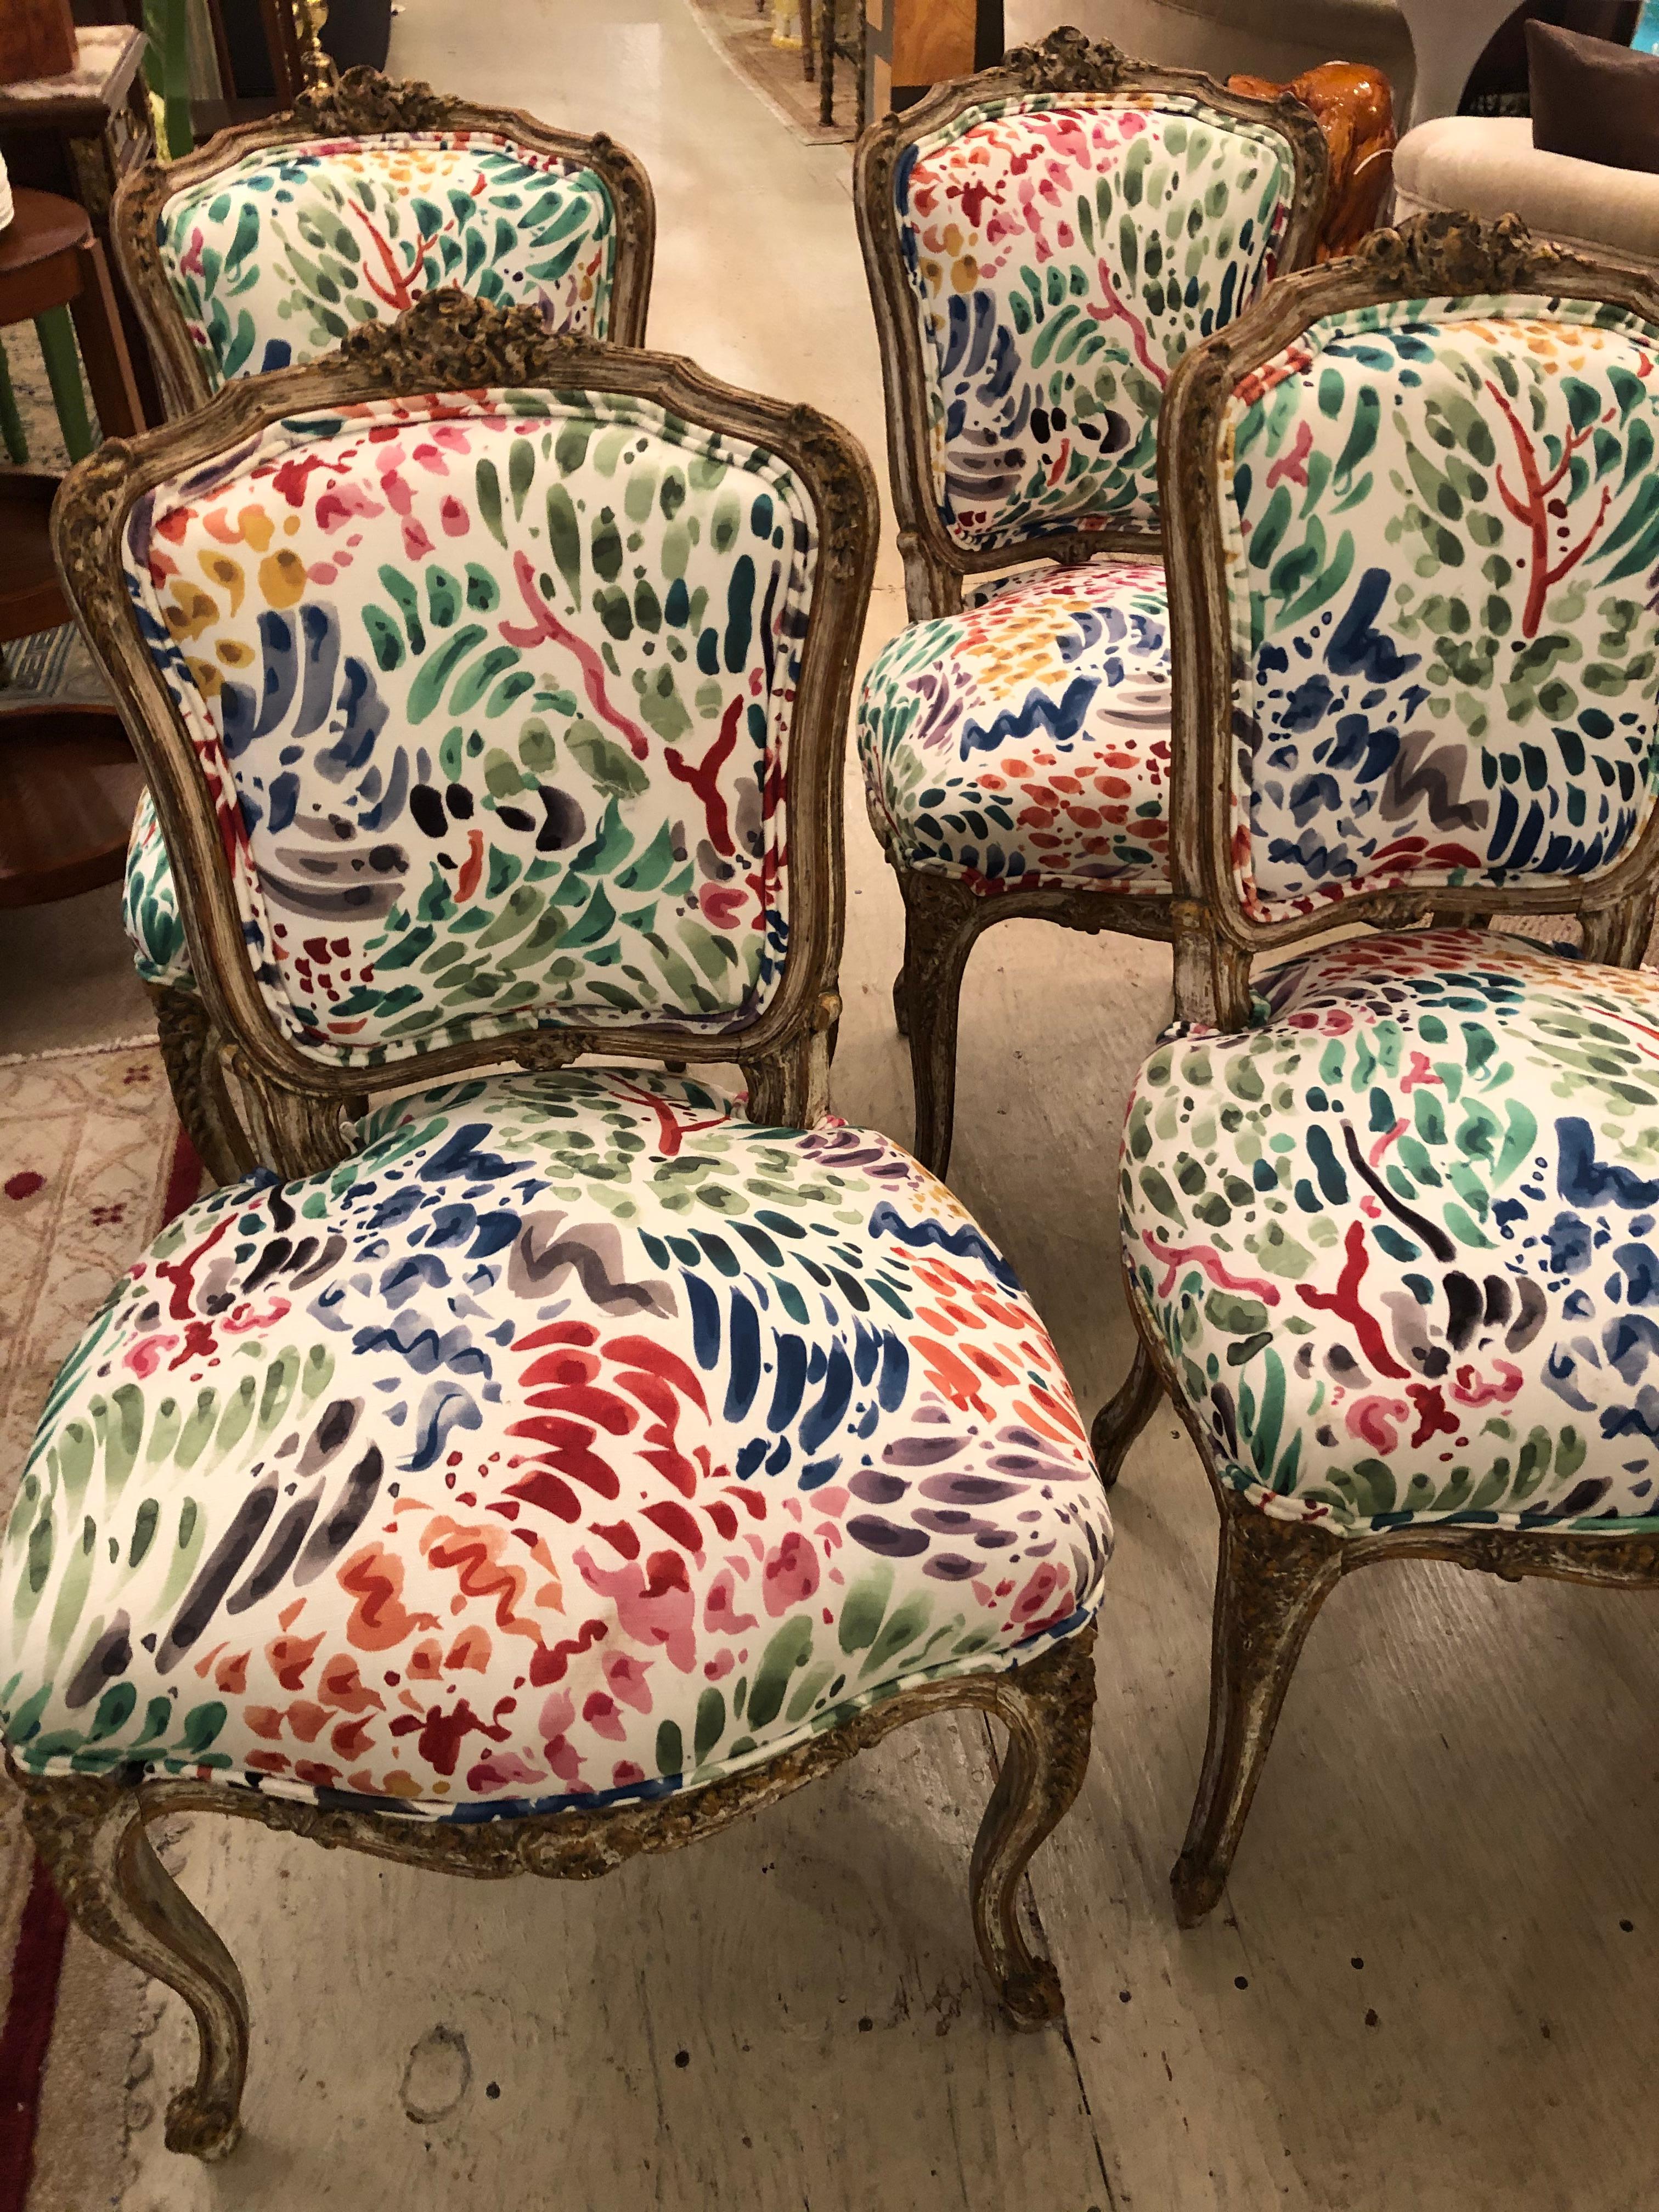 A chic diminutive adorable set of 4 Classic Louis XVI distressed painted carved wood side dining chairs, newly updated in a fun abstract pattern upholstery. Fabric has splashes of magenta, fushia, lime green and purple against a cream background.